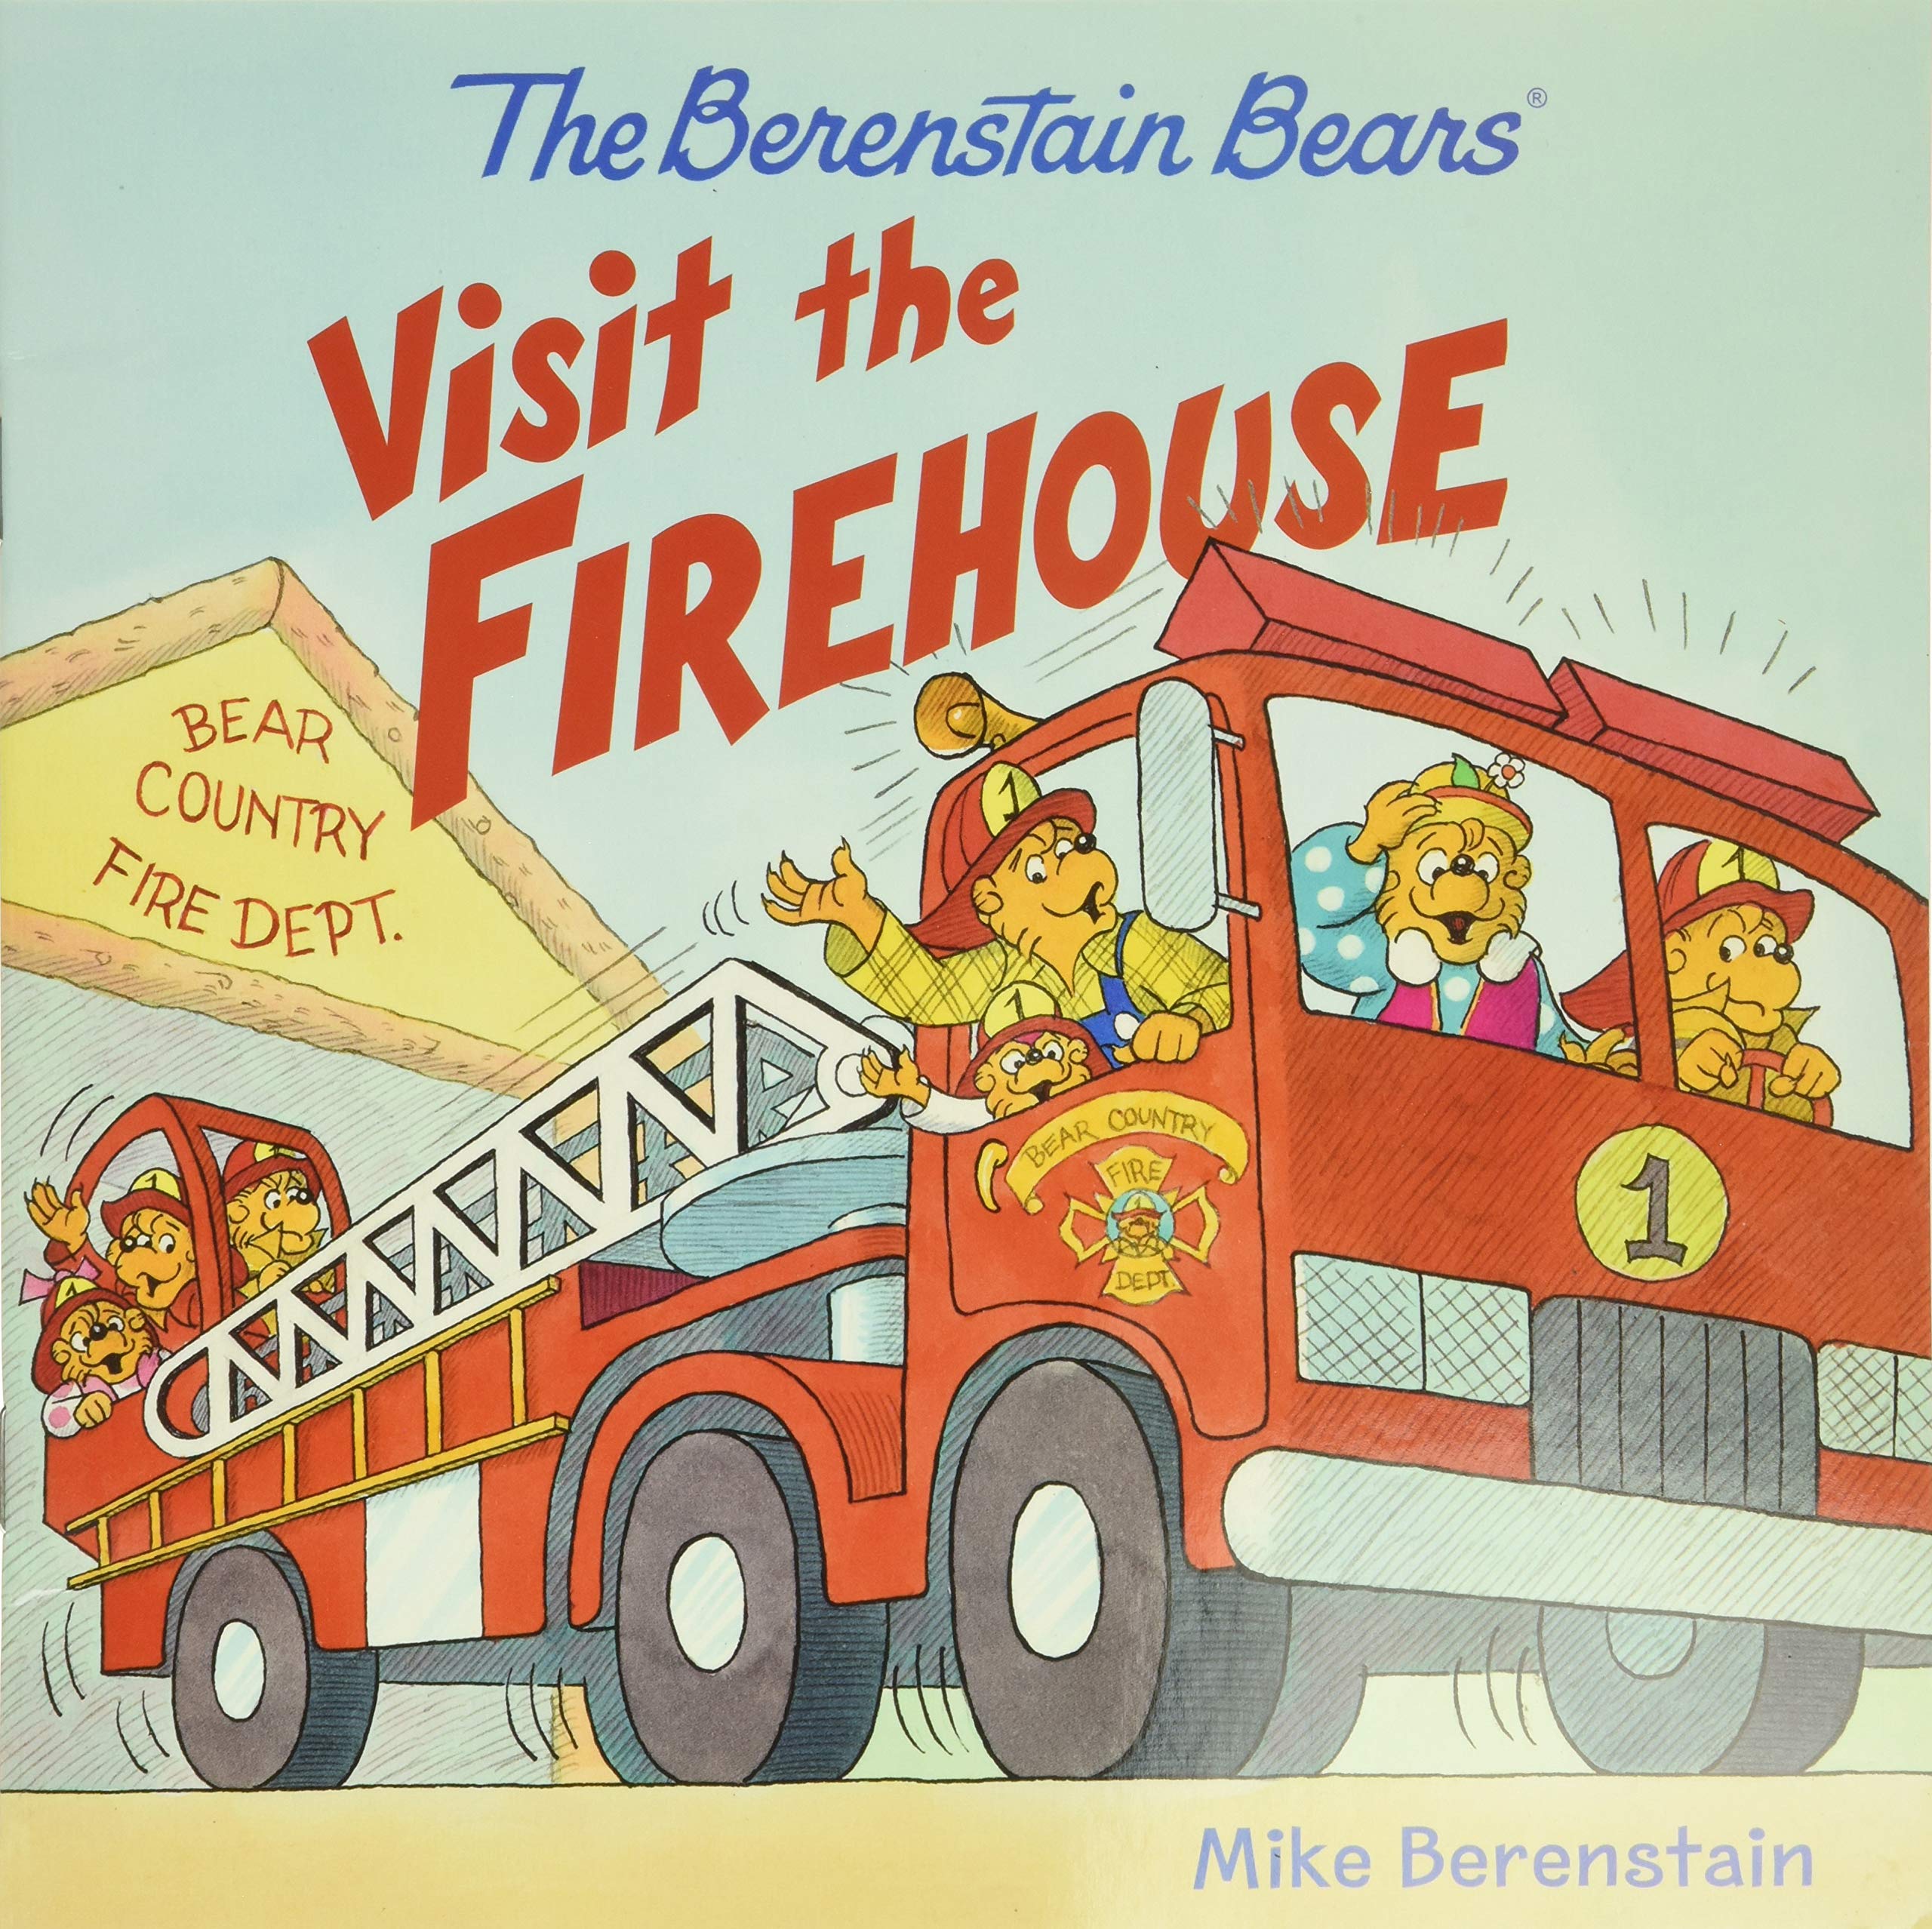 speech and language teaching concepts for berenstain bears visit the firehouse in speech therapy